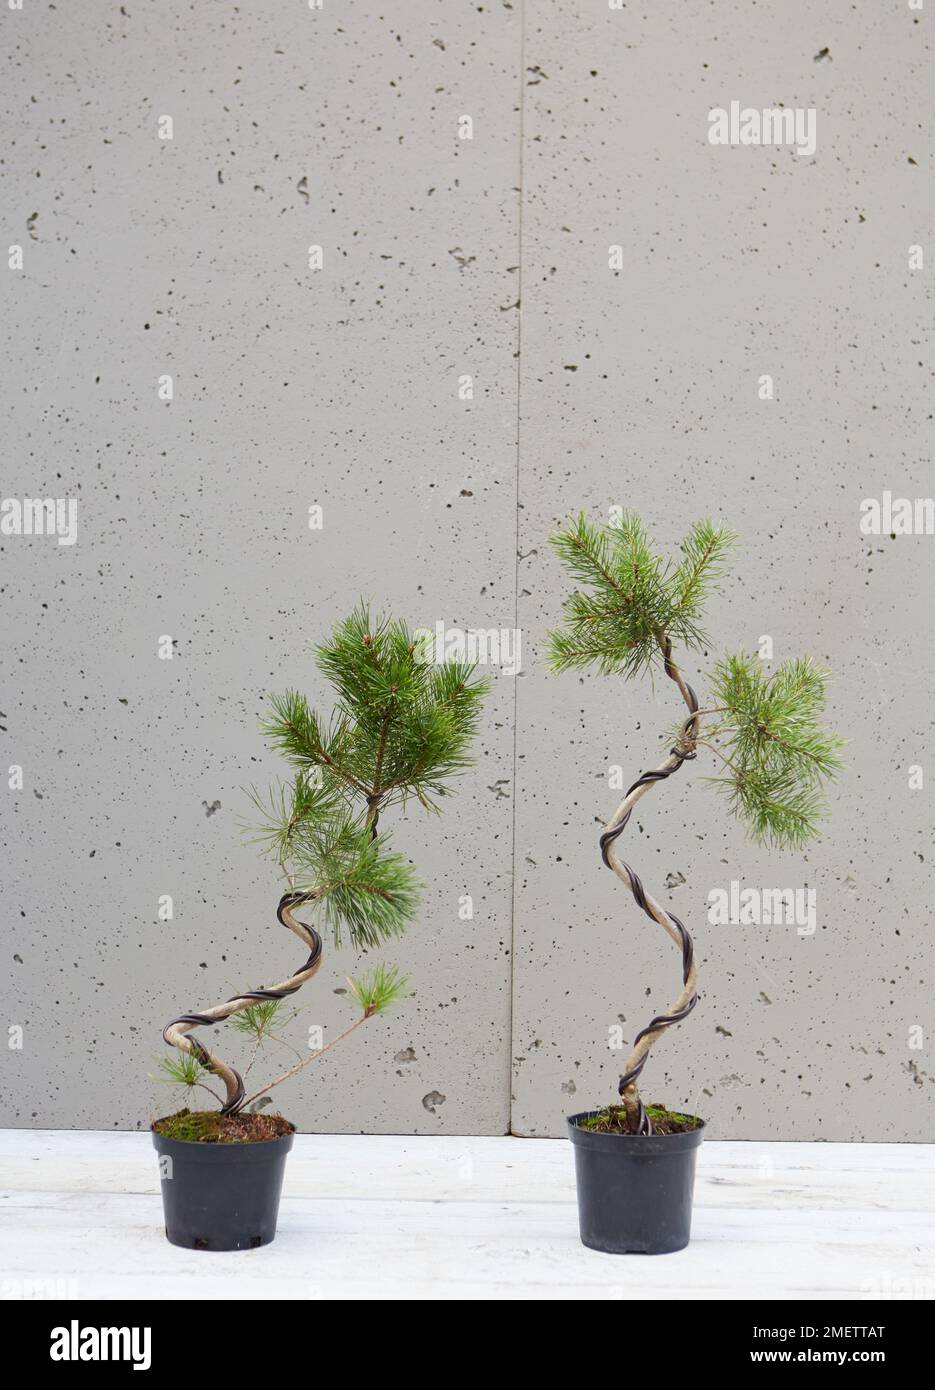 Starting a literati design, Good (left) and bad (right) wiring of a Scots Pine (Pinus Sylvestris) Stock Photo